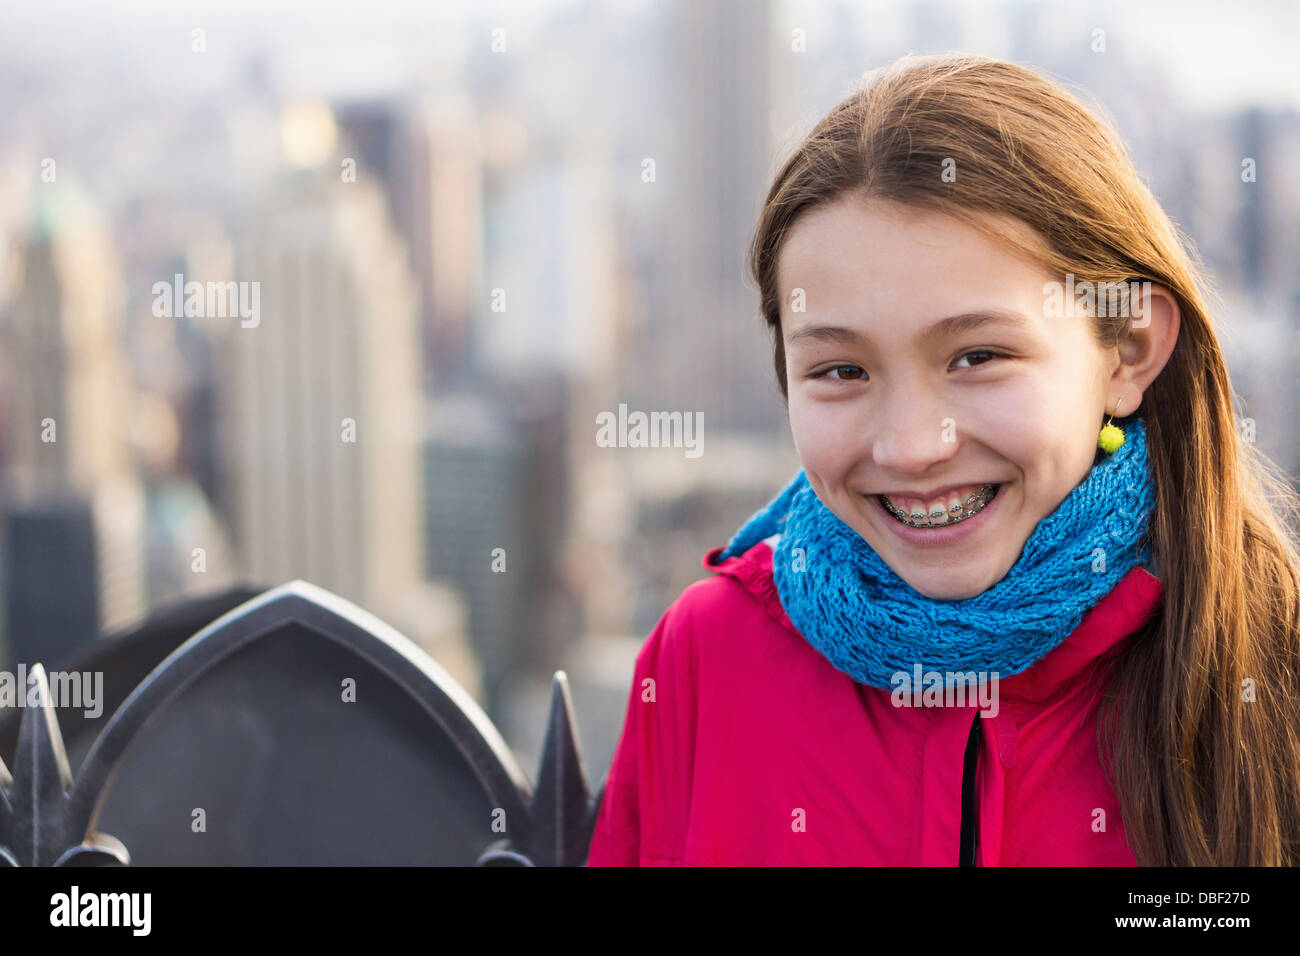 Mixed race girl smiling on urban rooftop Stock Photo